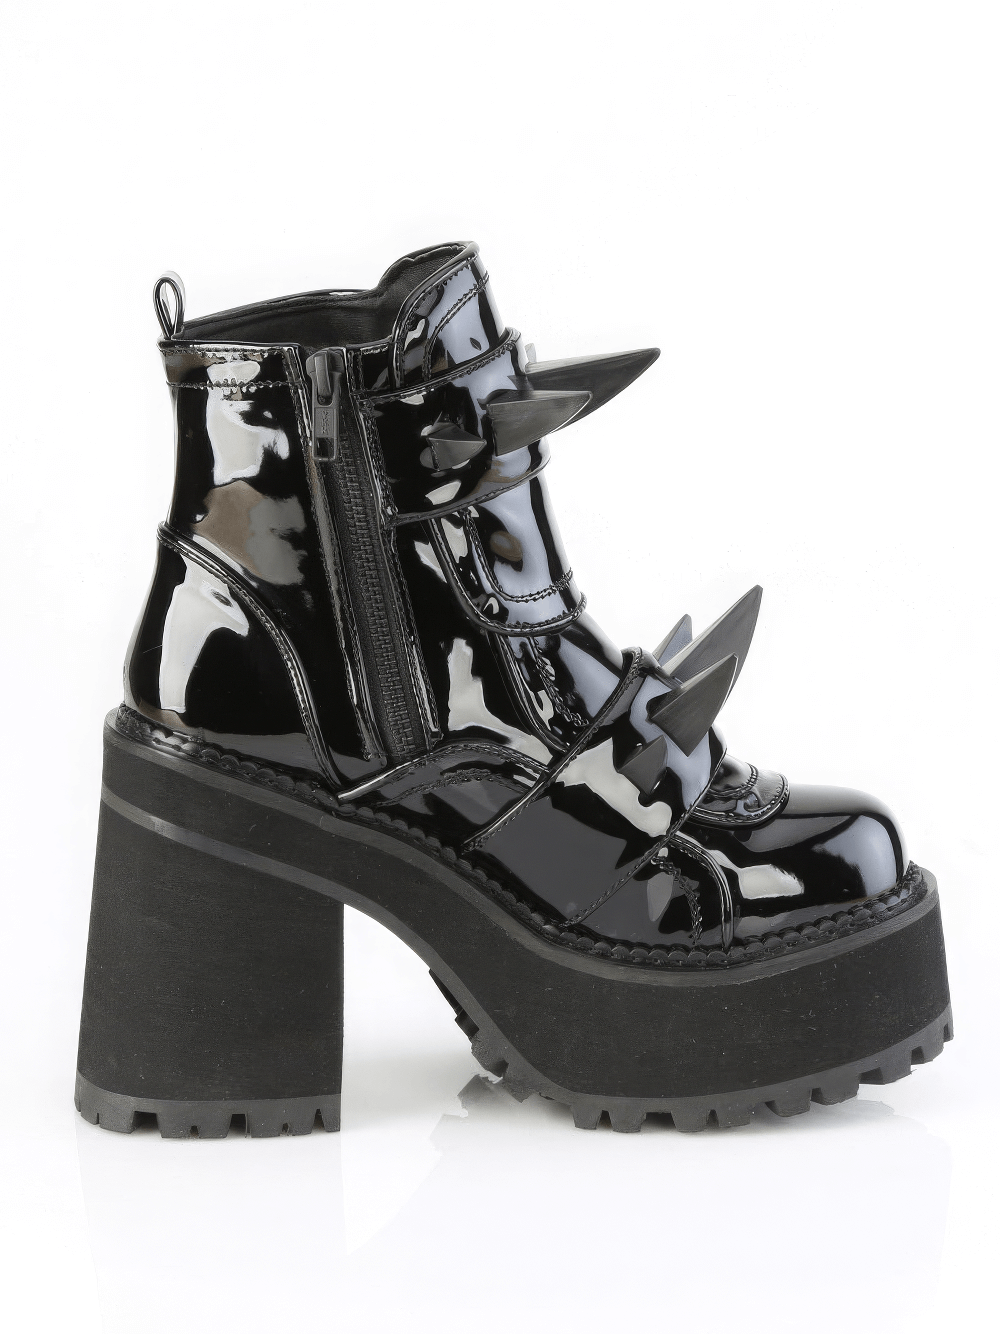 DEMONIA Glossy Black Coffin Buckle Studded Ankle Boots